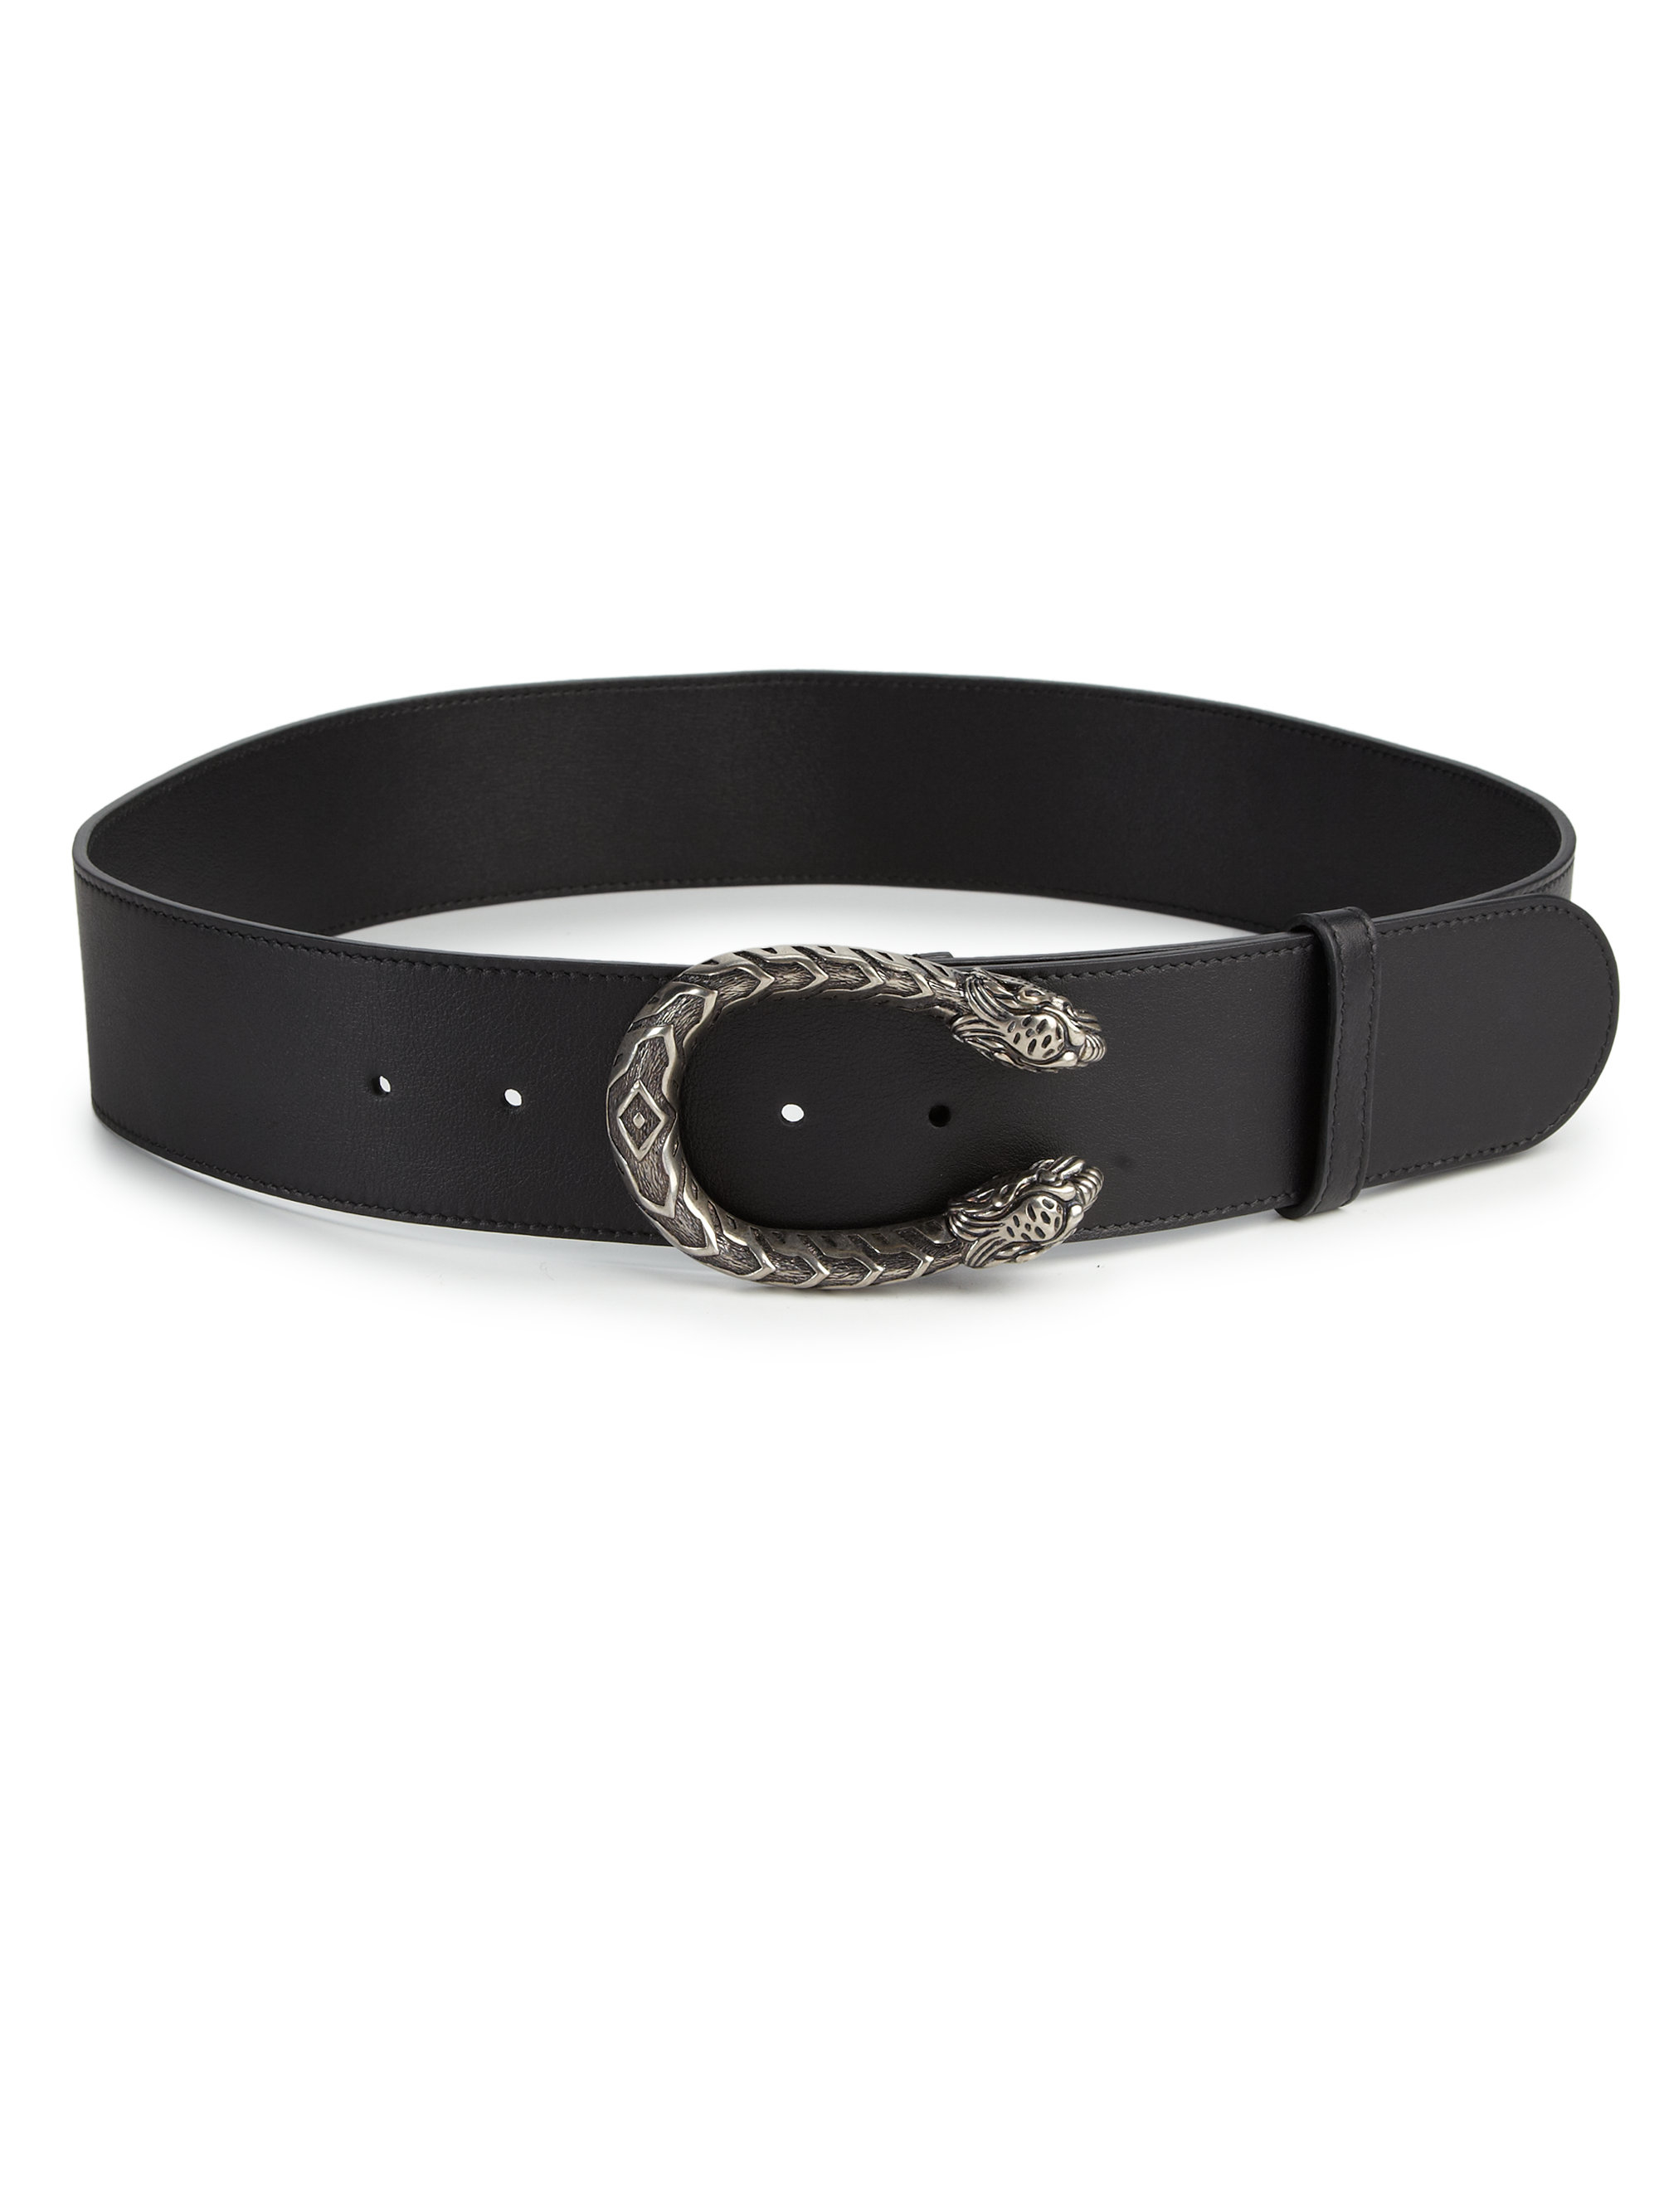 Lyst - Gucci Leather Belt in Black